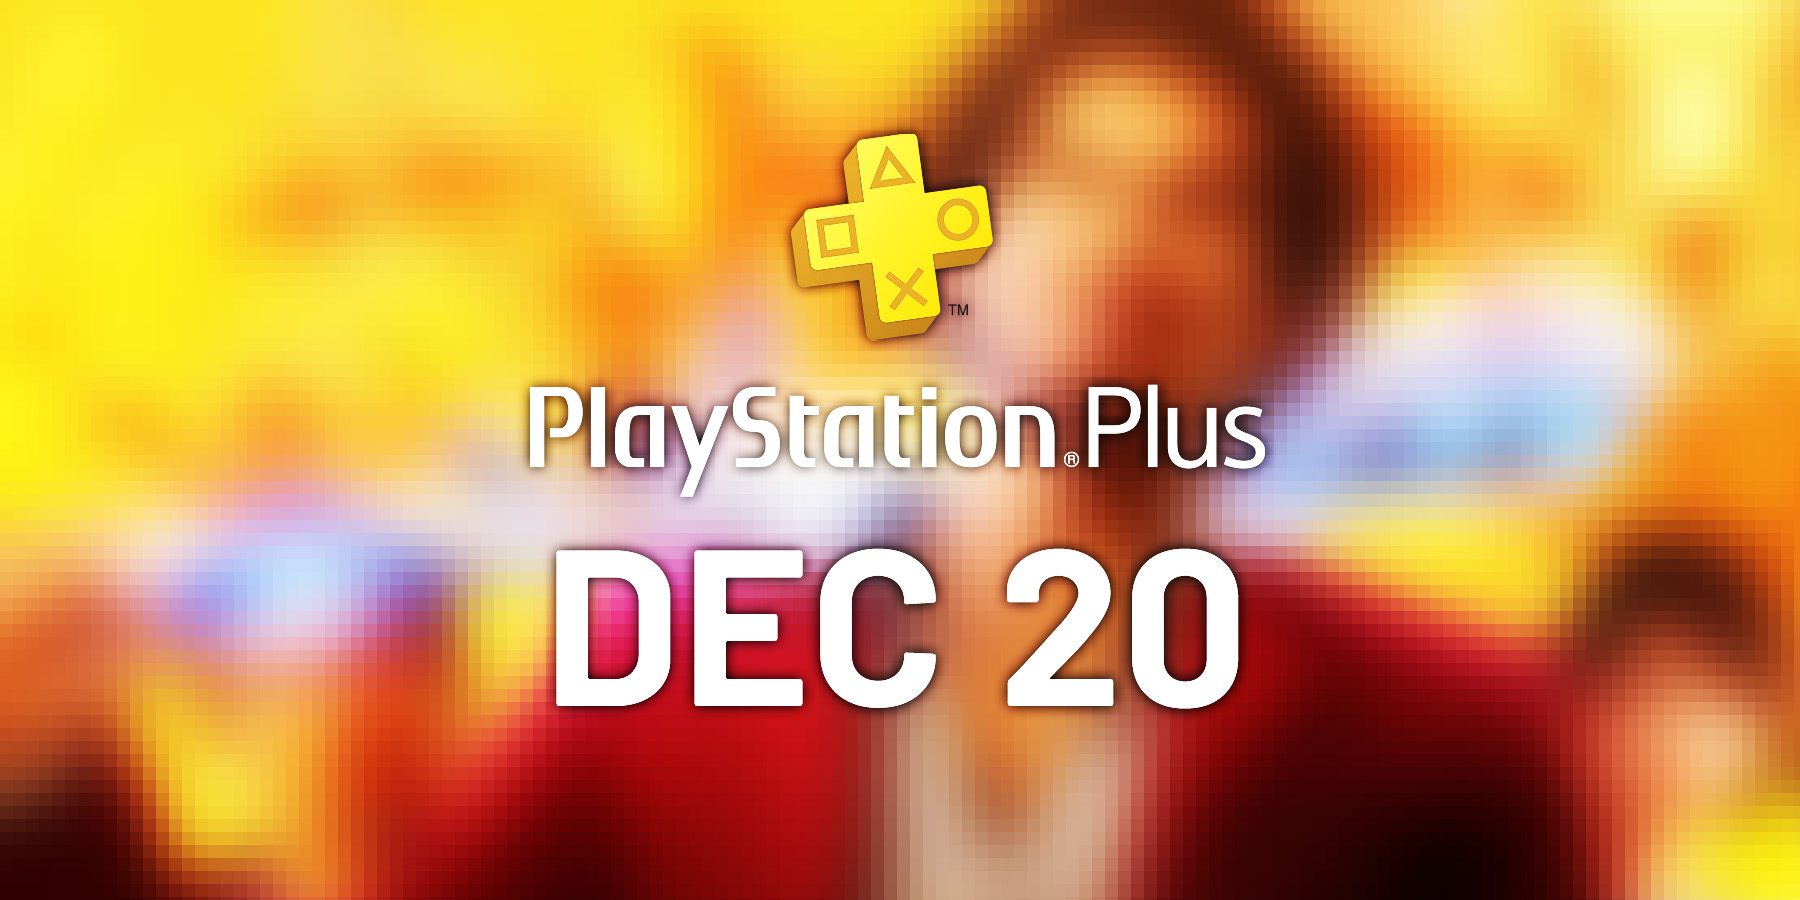 December 20 is Going to Be a Huge Day for PS Plus Premium Subscribers